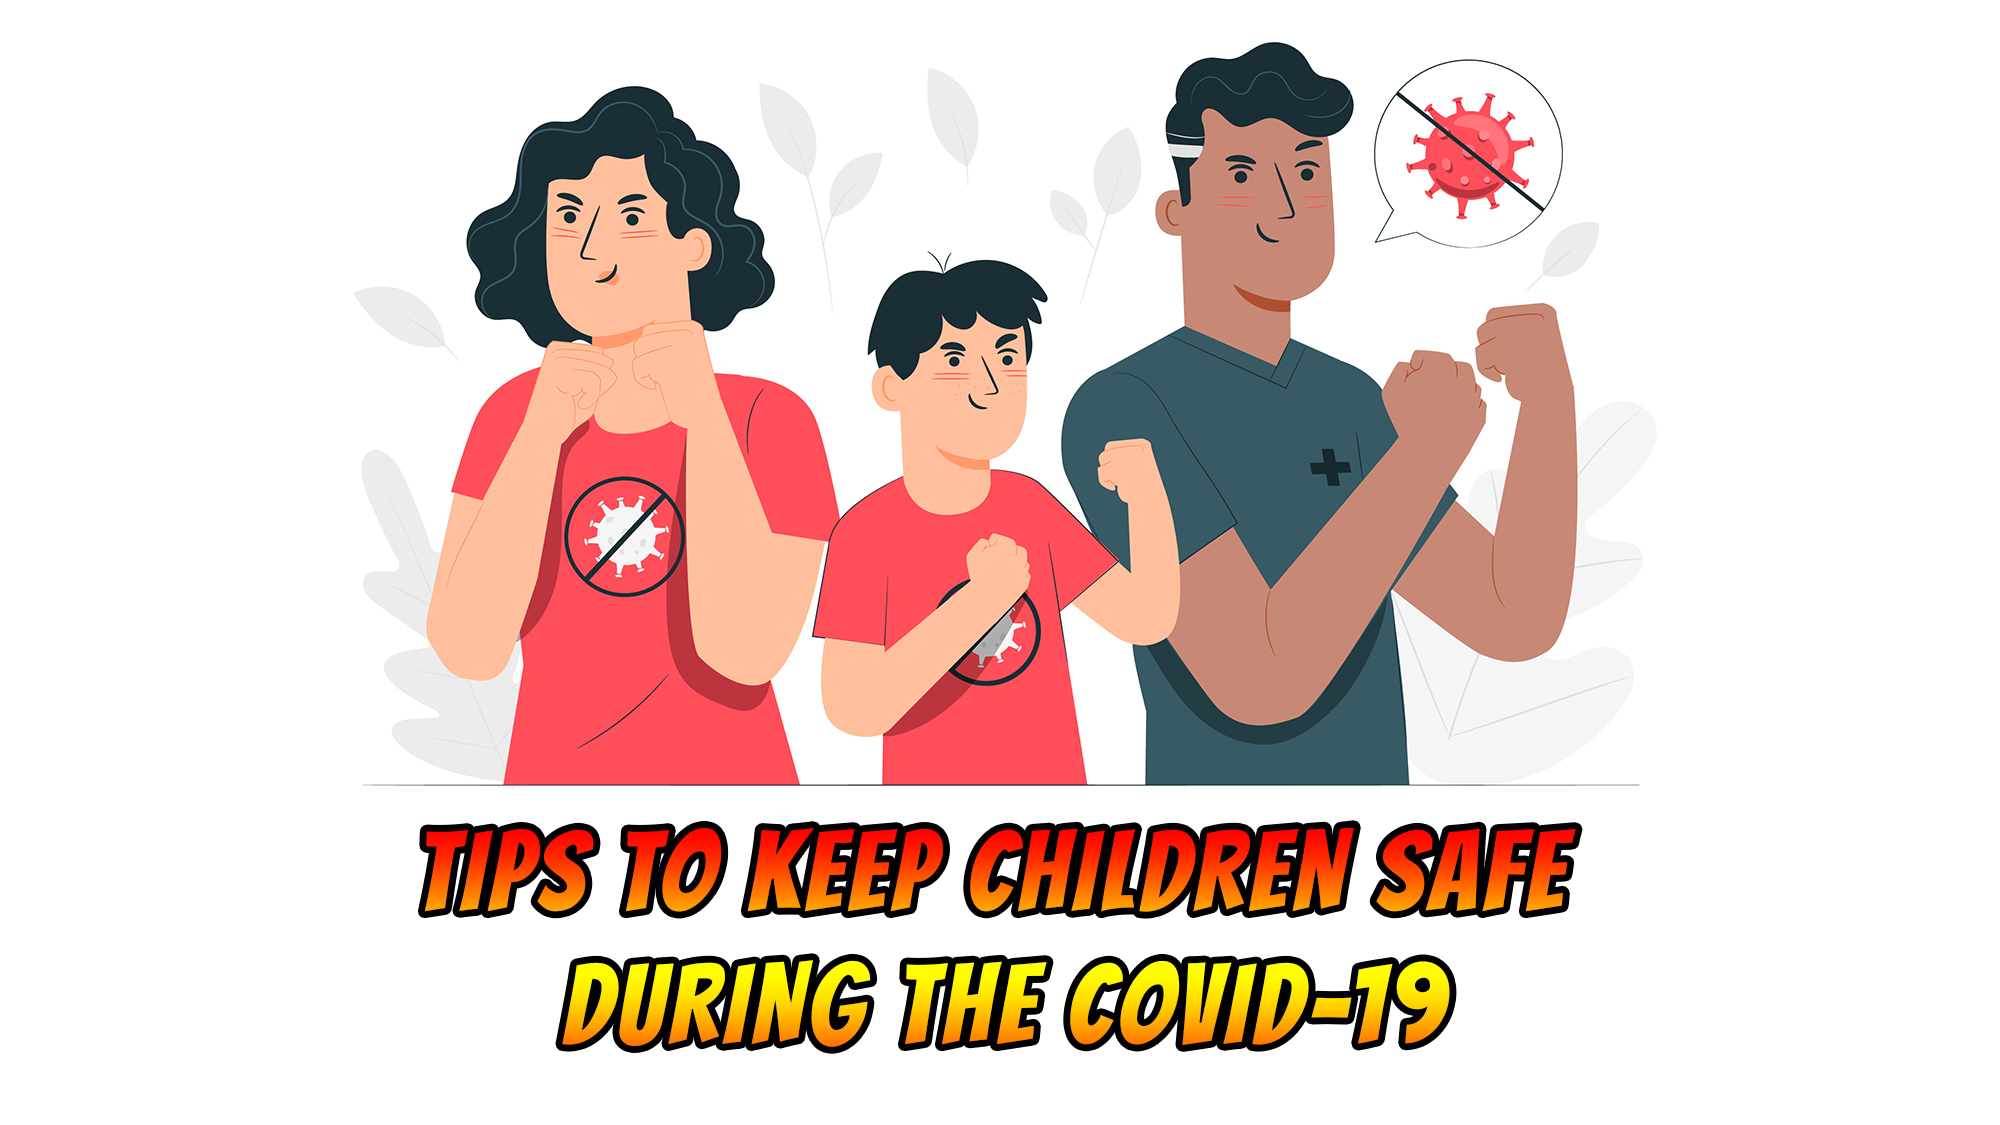 Tips to Keep Children Safe During the COVID-19